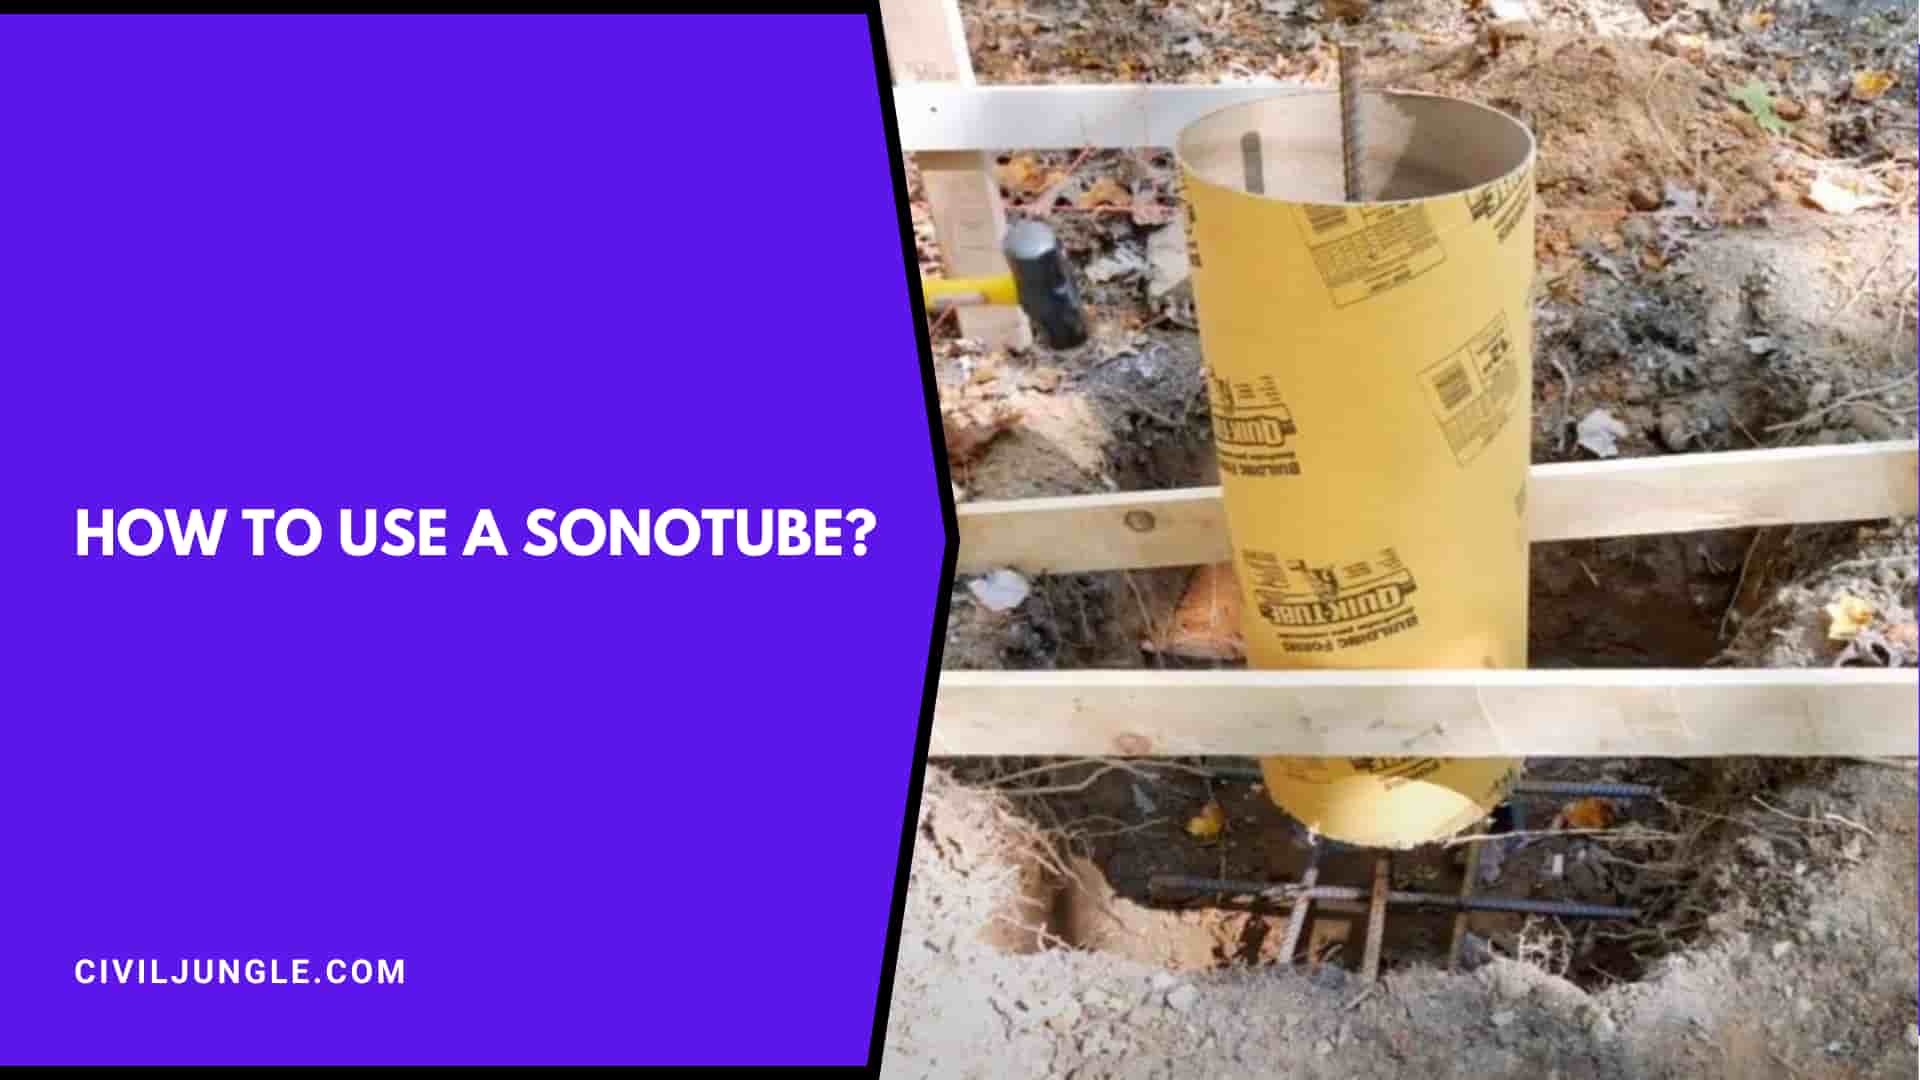 How To Use A Sonotube?